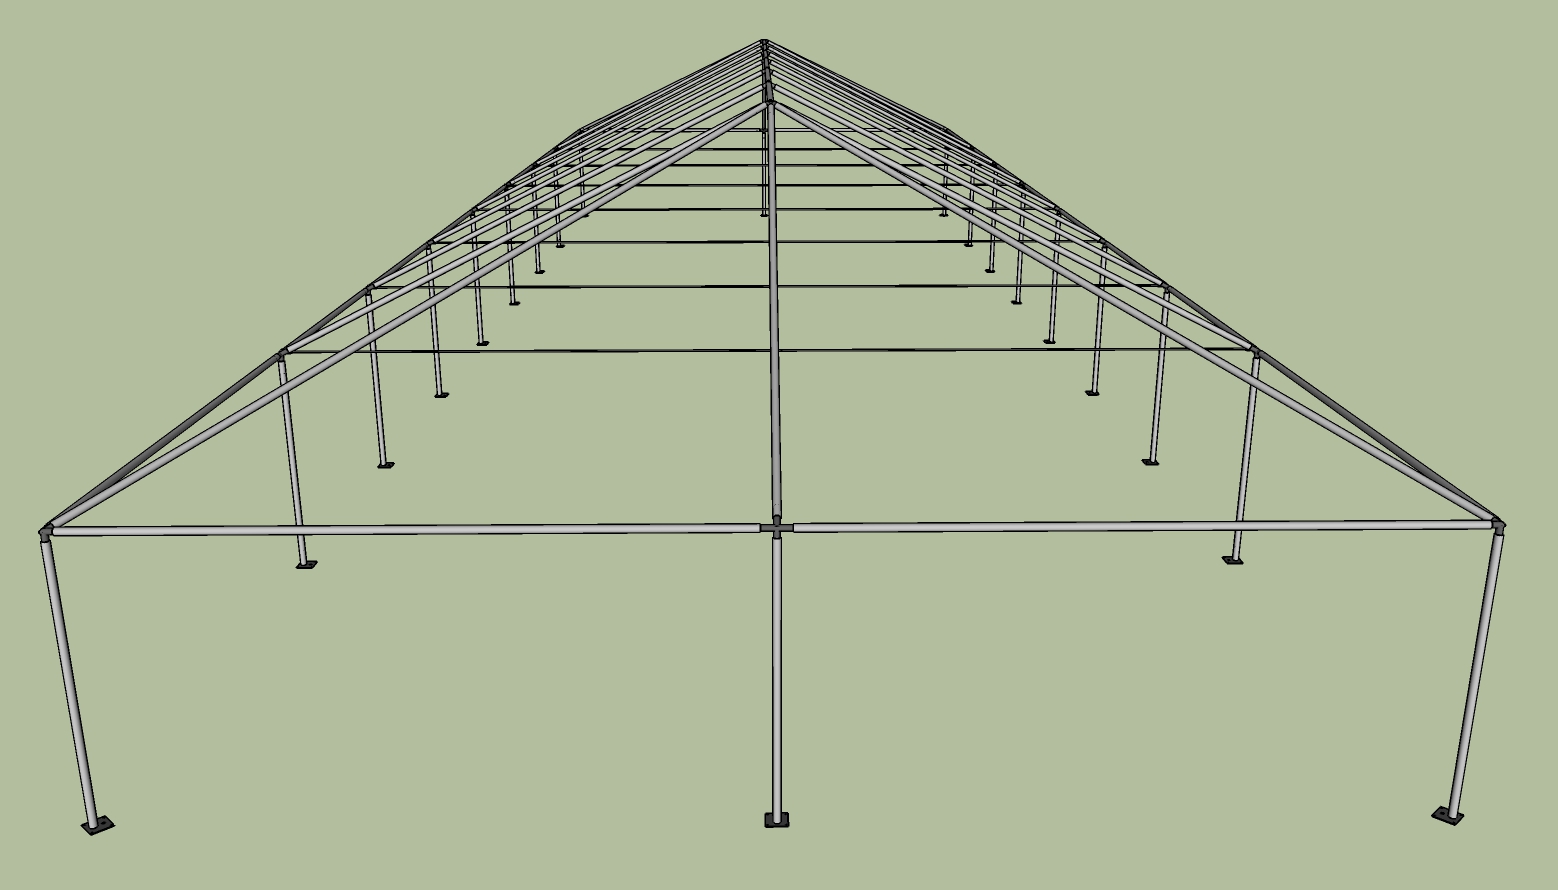 30x90 frame tent side view